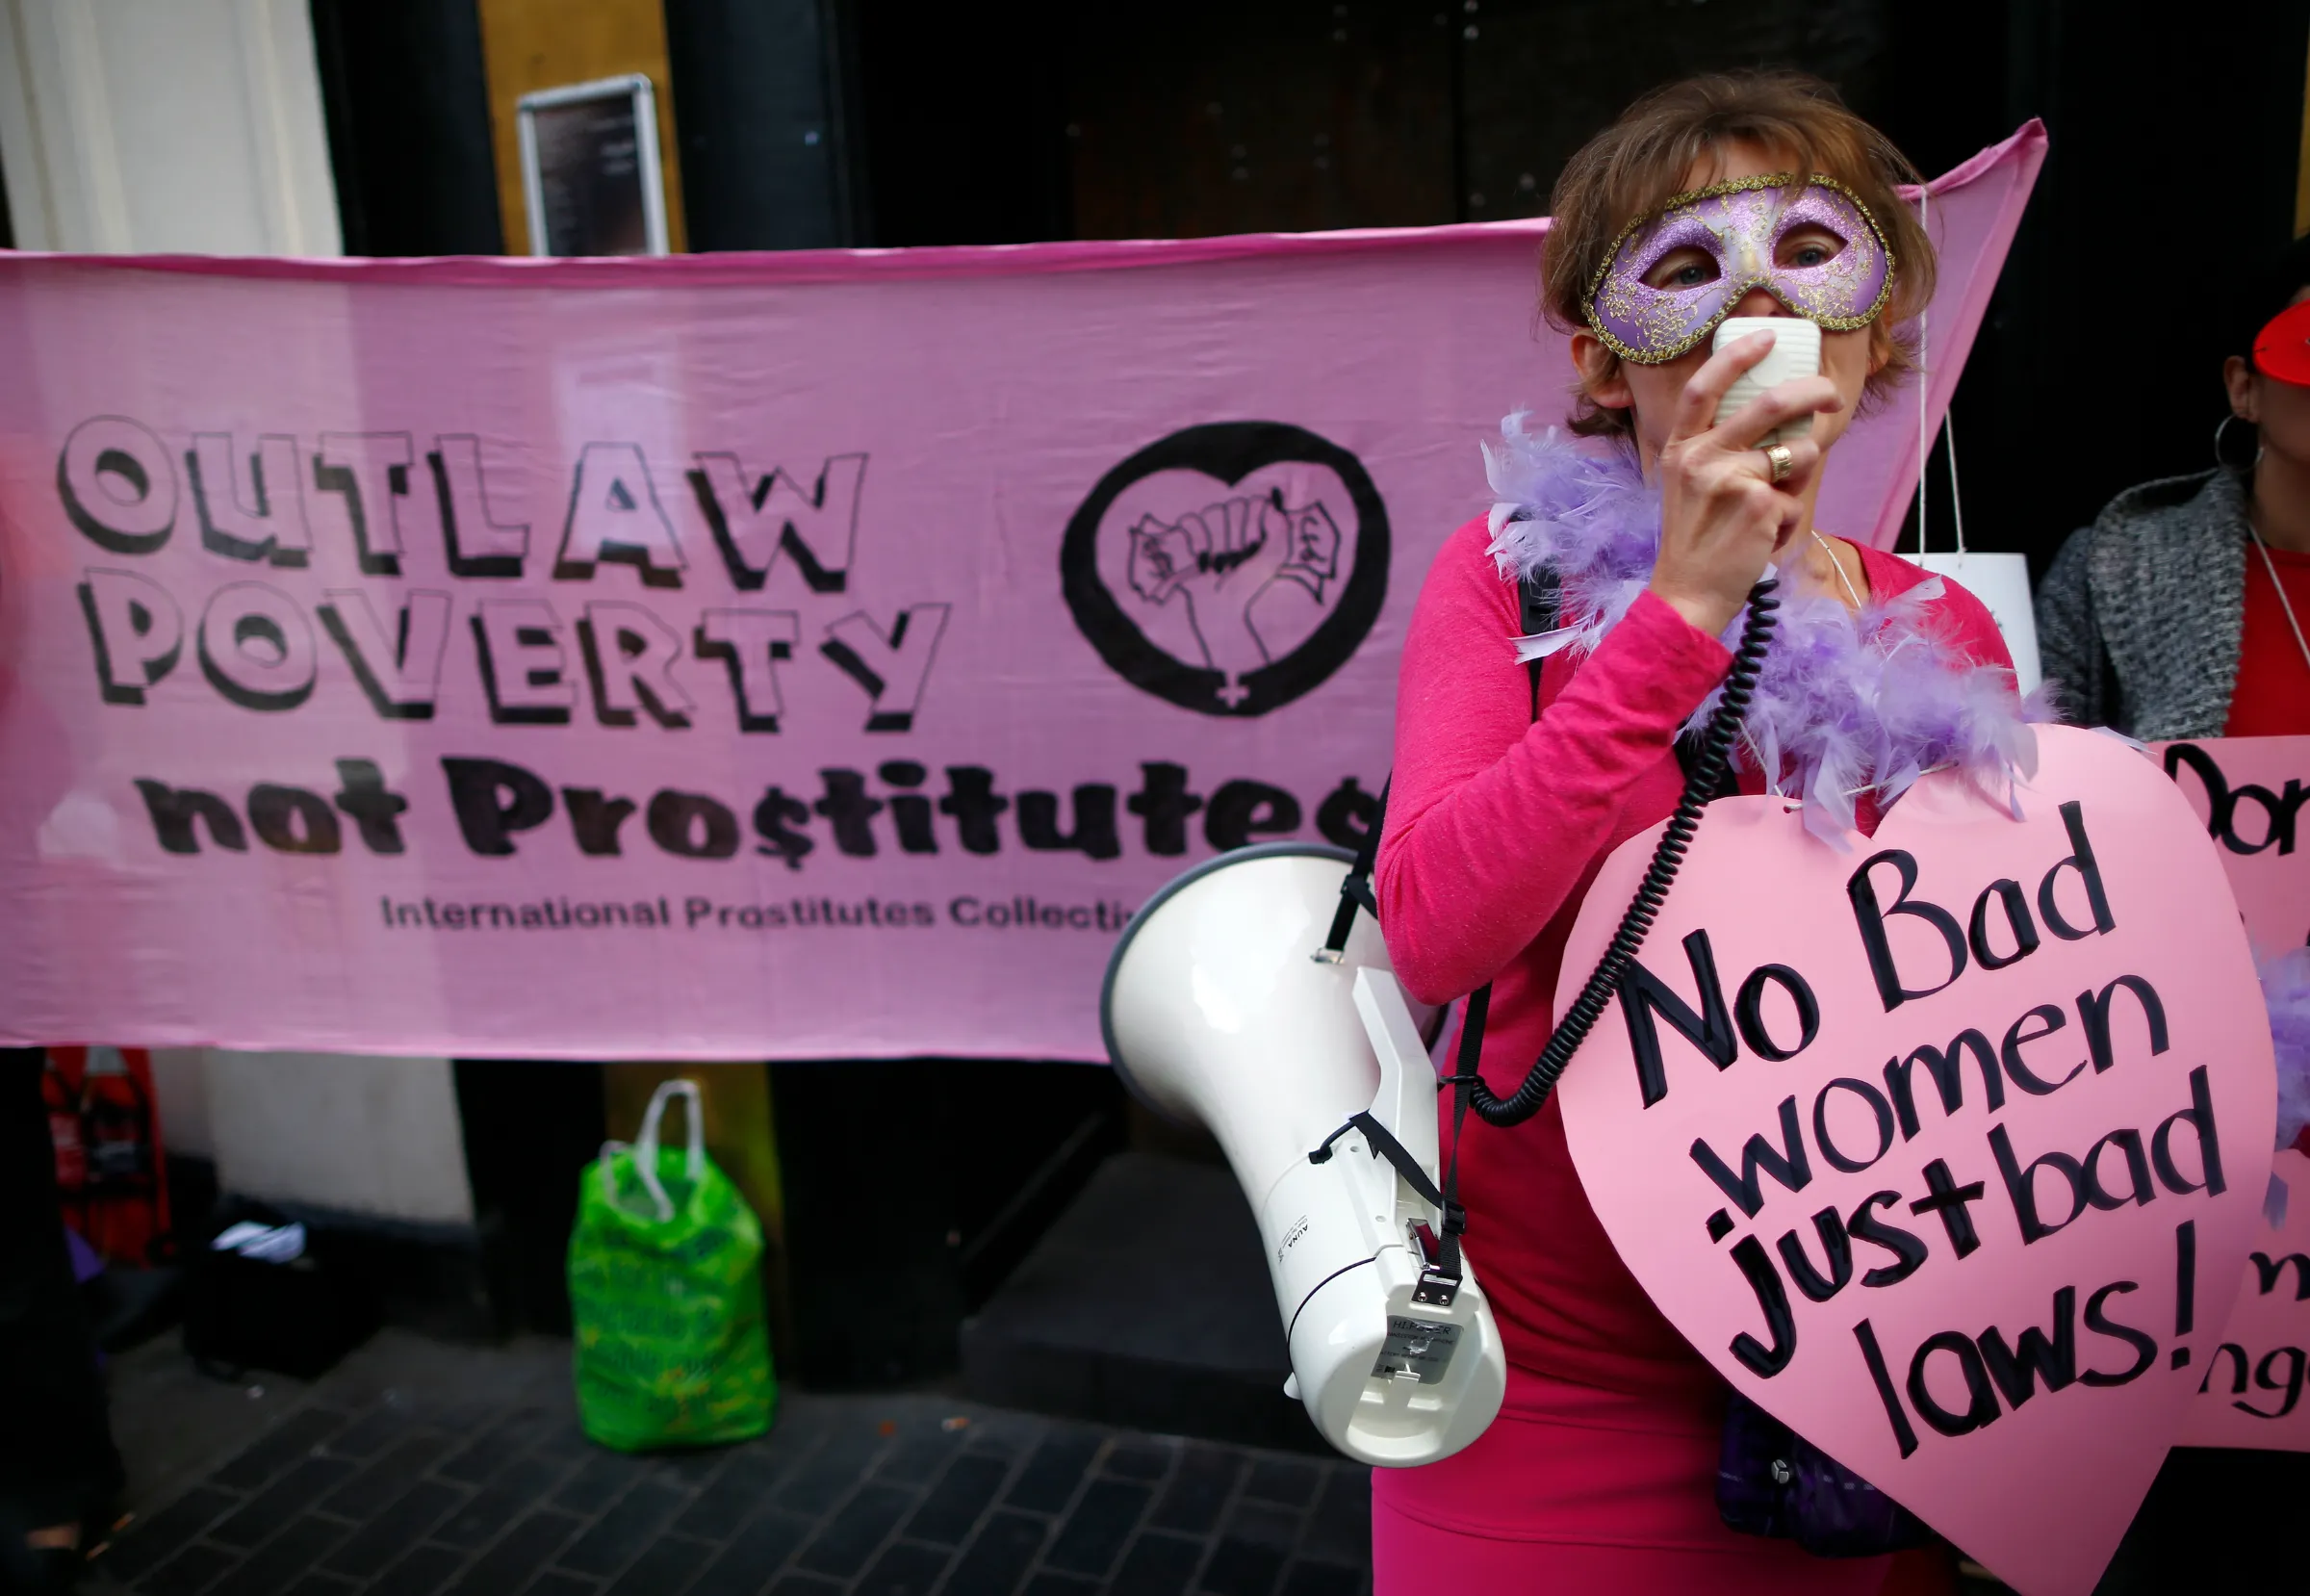 Niki Adams from the English Collective of Prostitutes, speaks through a megaphone during a demonstration at the offices of Soho estates by sex workers against the threat of eviction from a building in Soho, in central London October 9, 2013. REUTERS/Andrew Winning